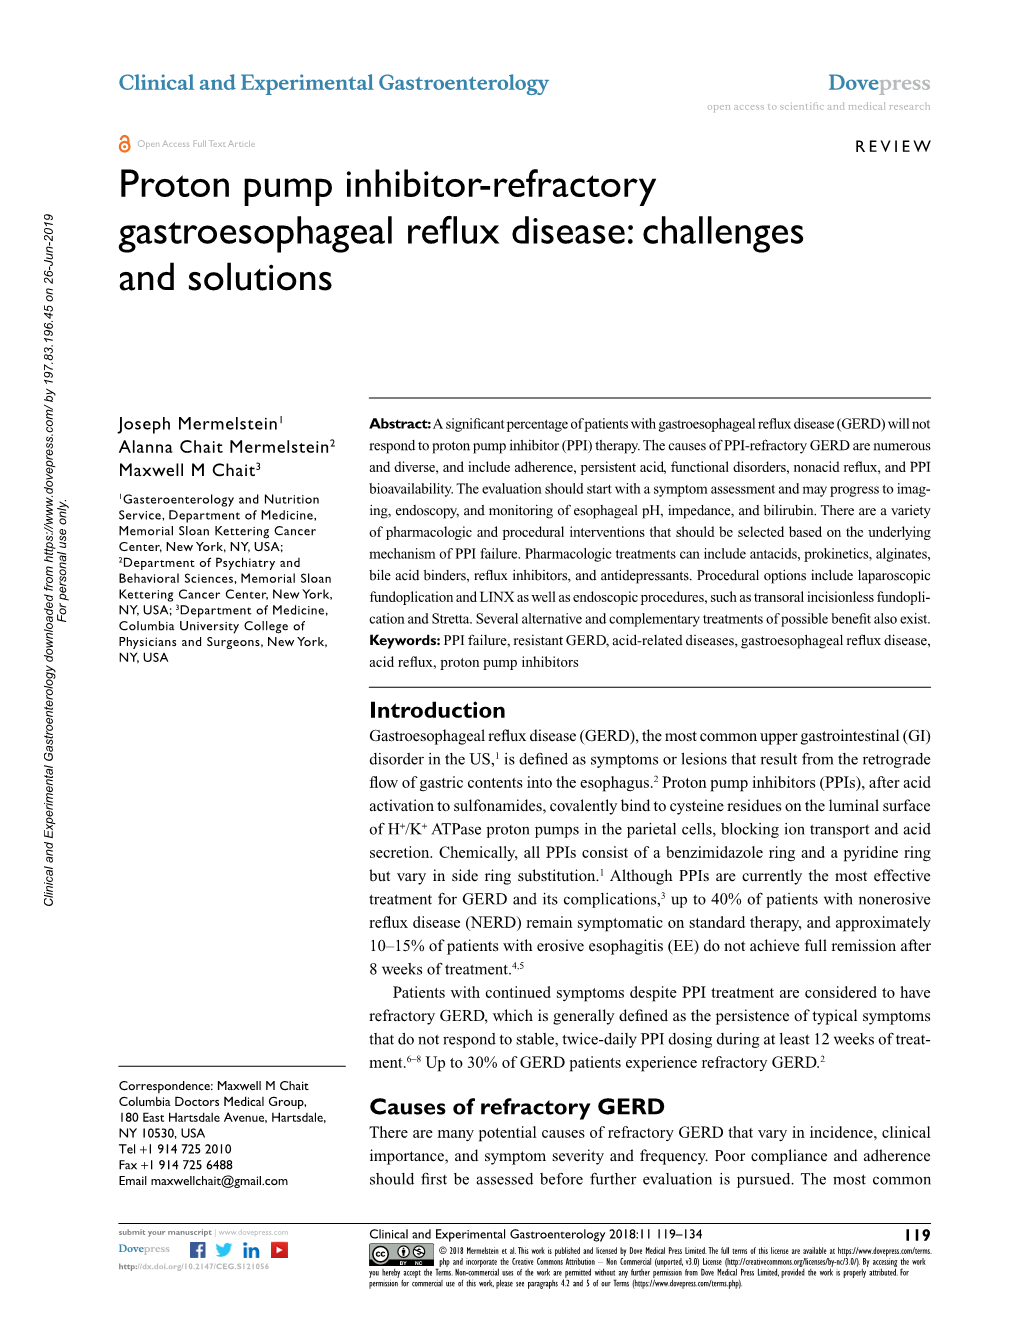 Proton Pump Inhibitor-Refractory Gastroesophageal Reflux Disease: Challenges and Solutions